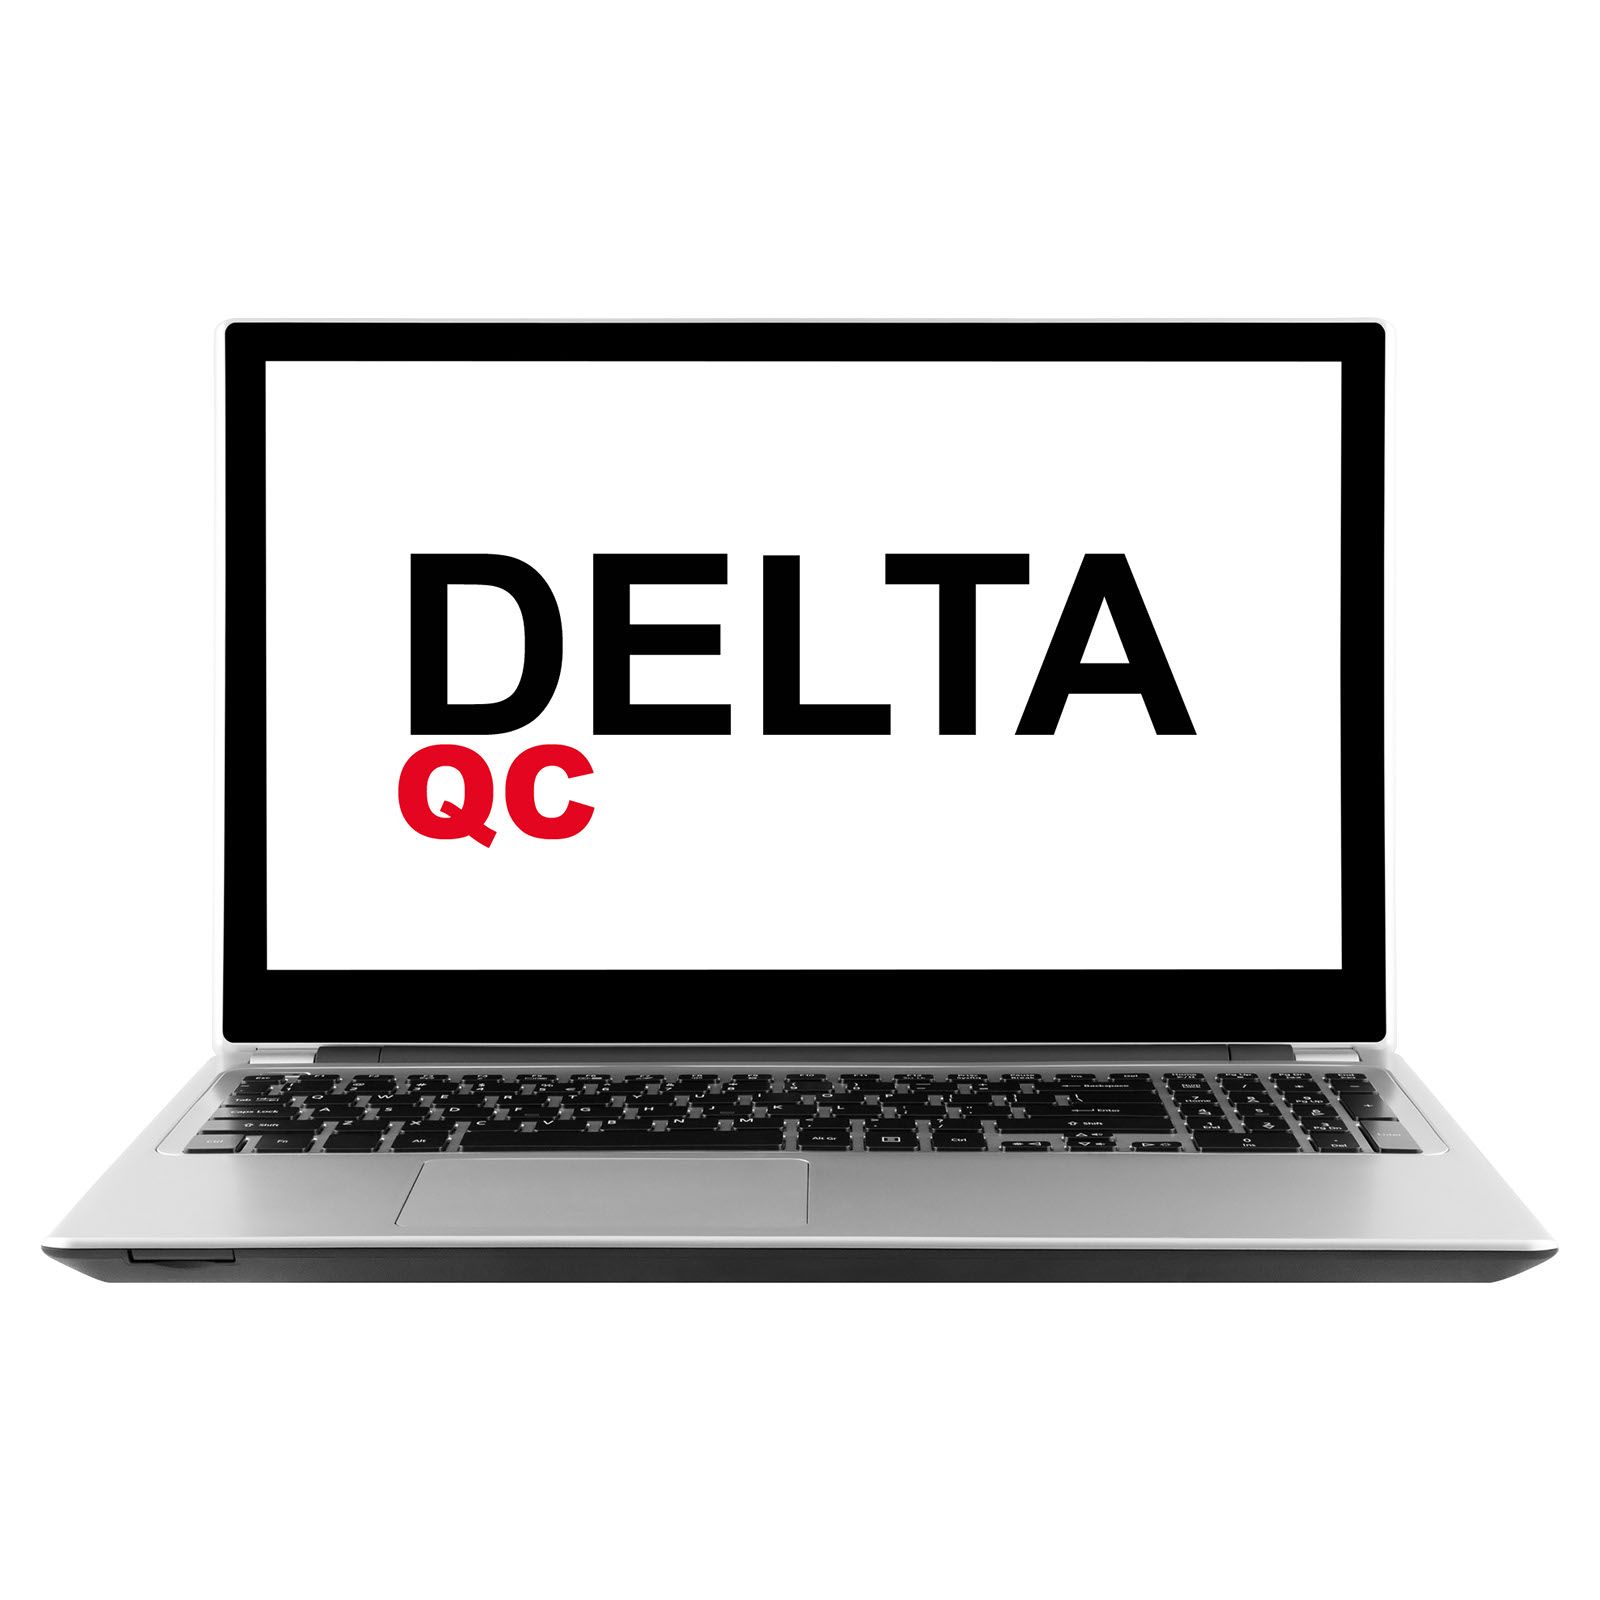 DELTA QC LICENSED 5 USERS product photo